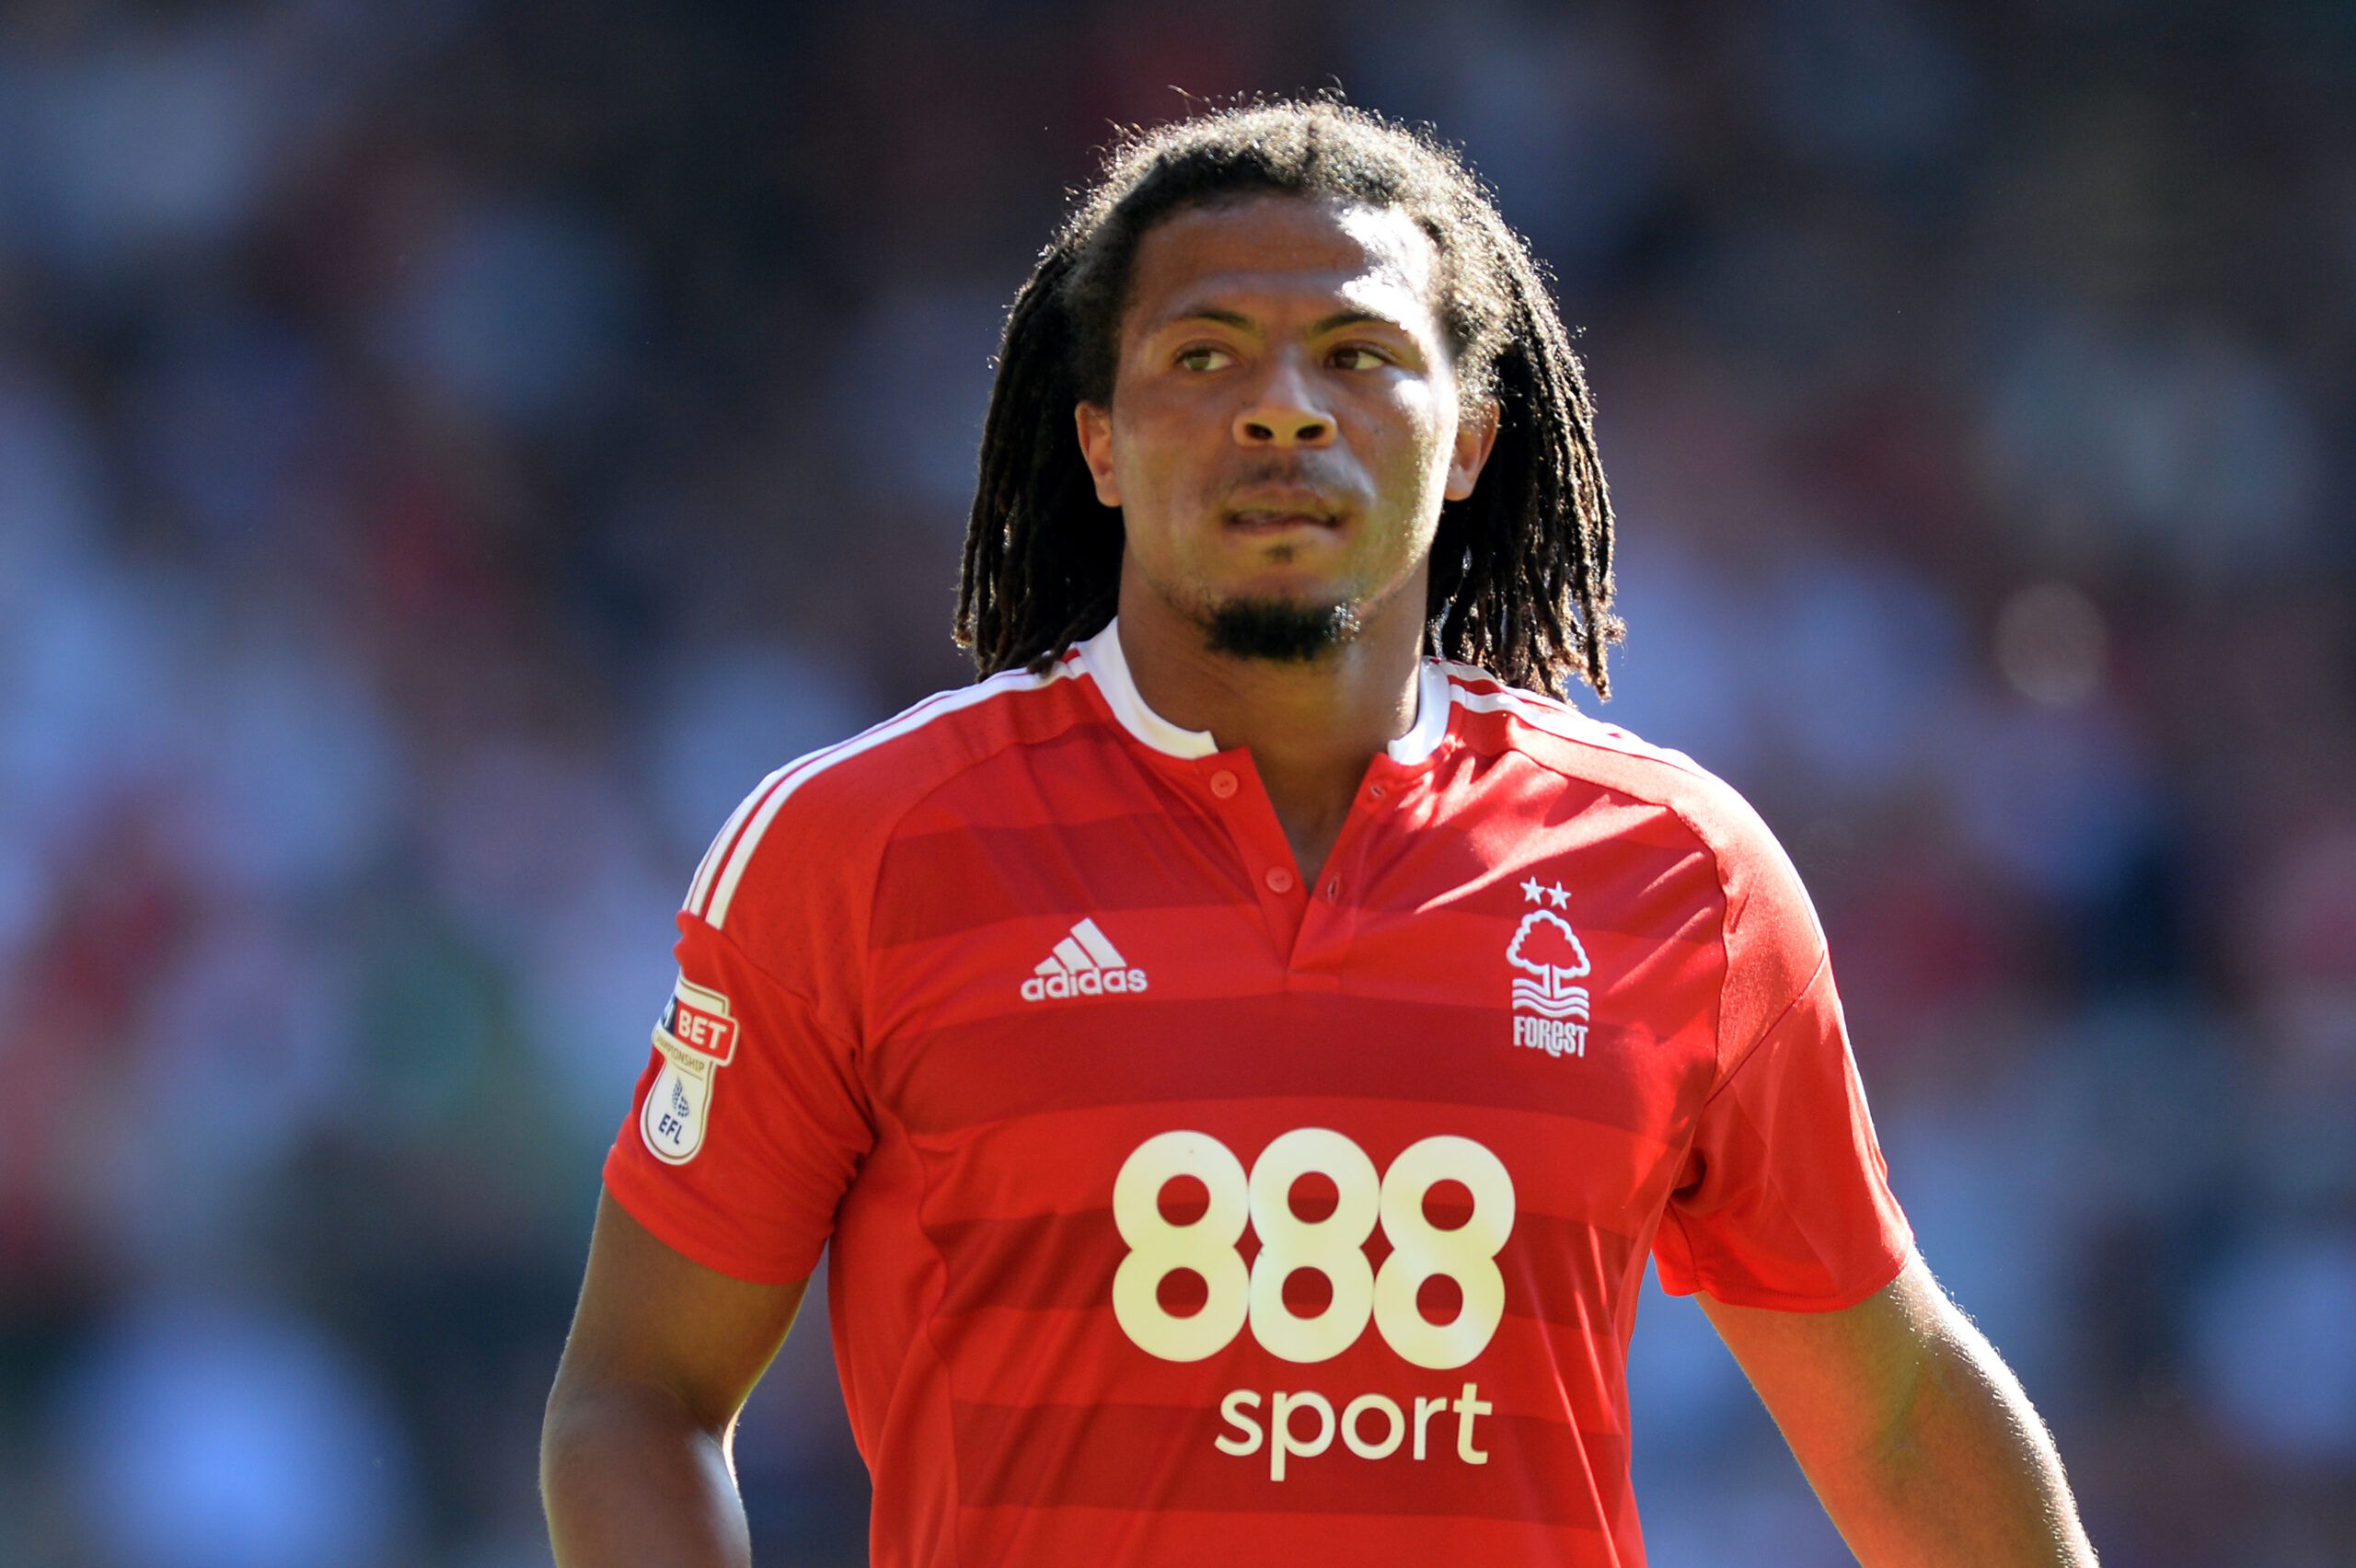 Football Soccer Britain - Nottingham Forest v Burton Albion - Sky Bet Championship - The City Ground - 16/17 - 6/8/16 
Nottingham Forest's Hildeberto Pereira 
Mandatory Credit: Action Images / Alan Walter 
EDITORIAL USE ONLY.